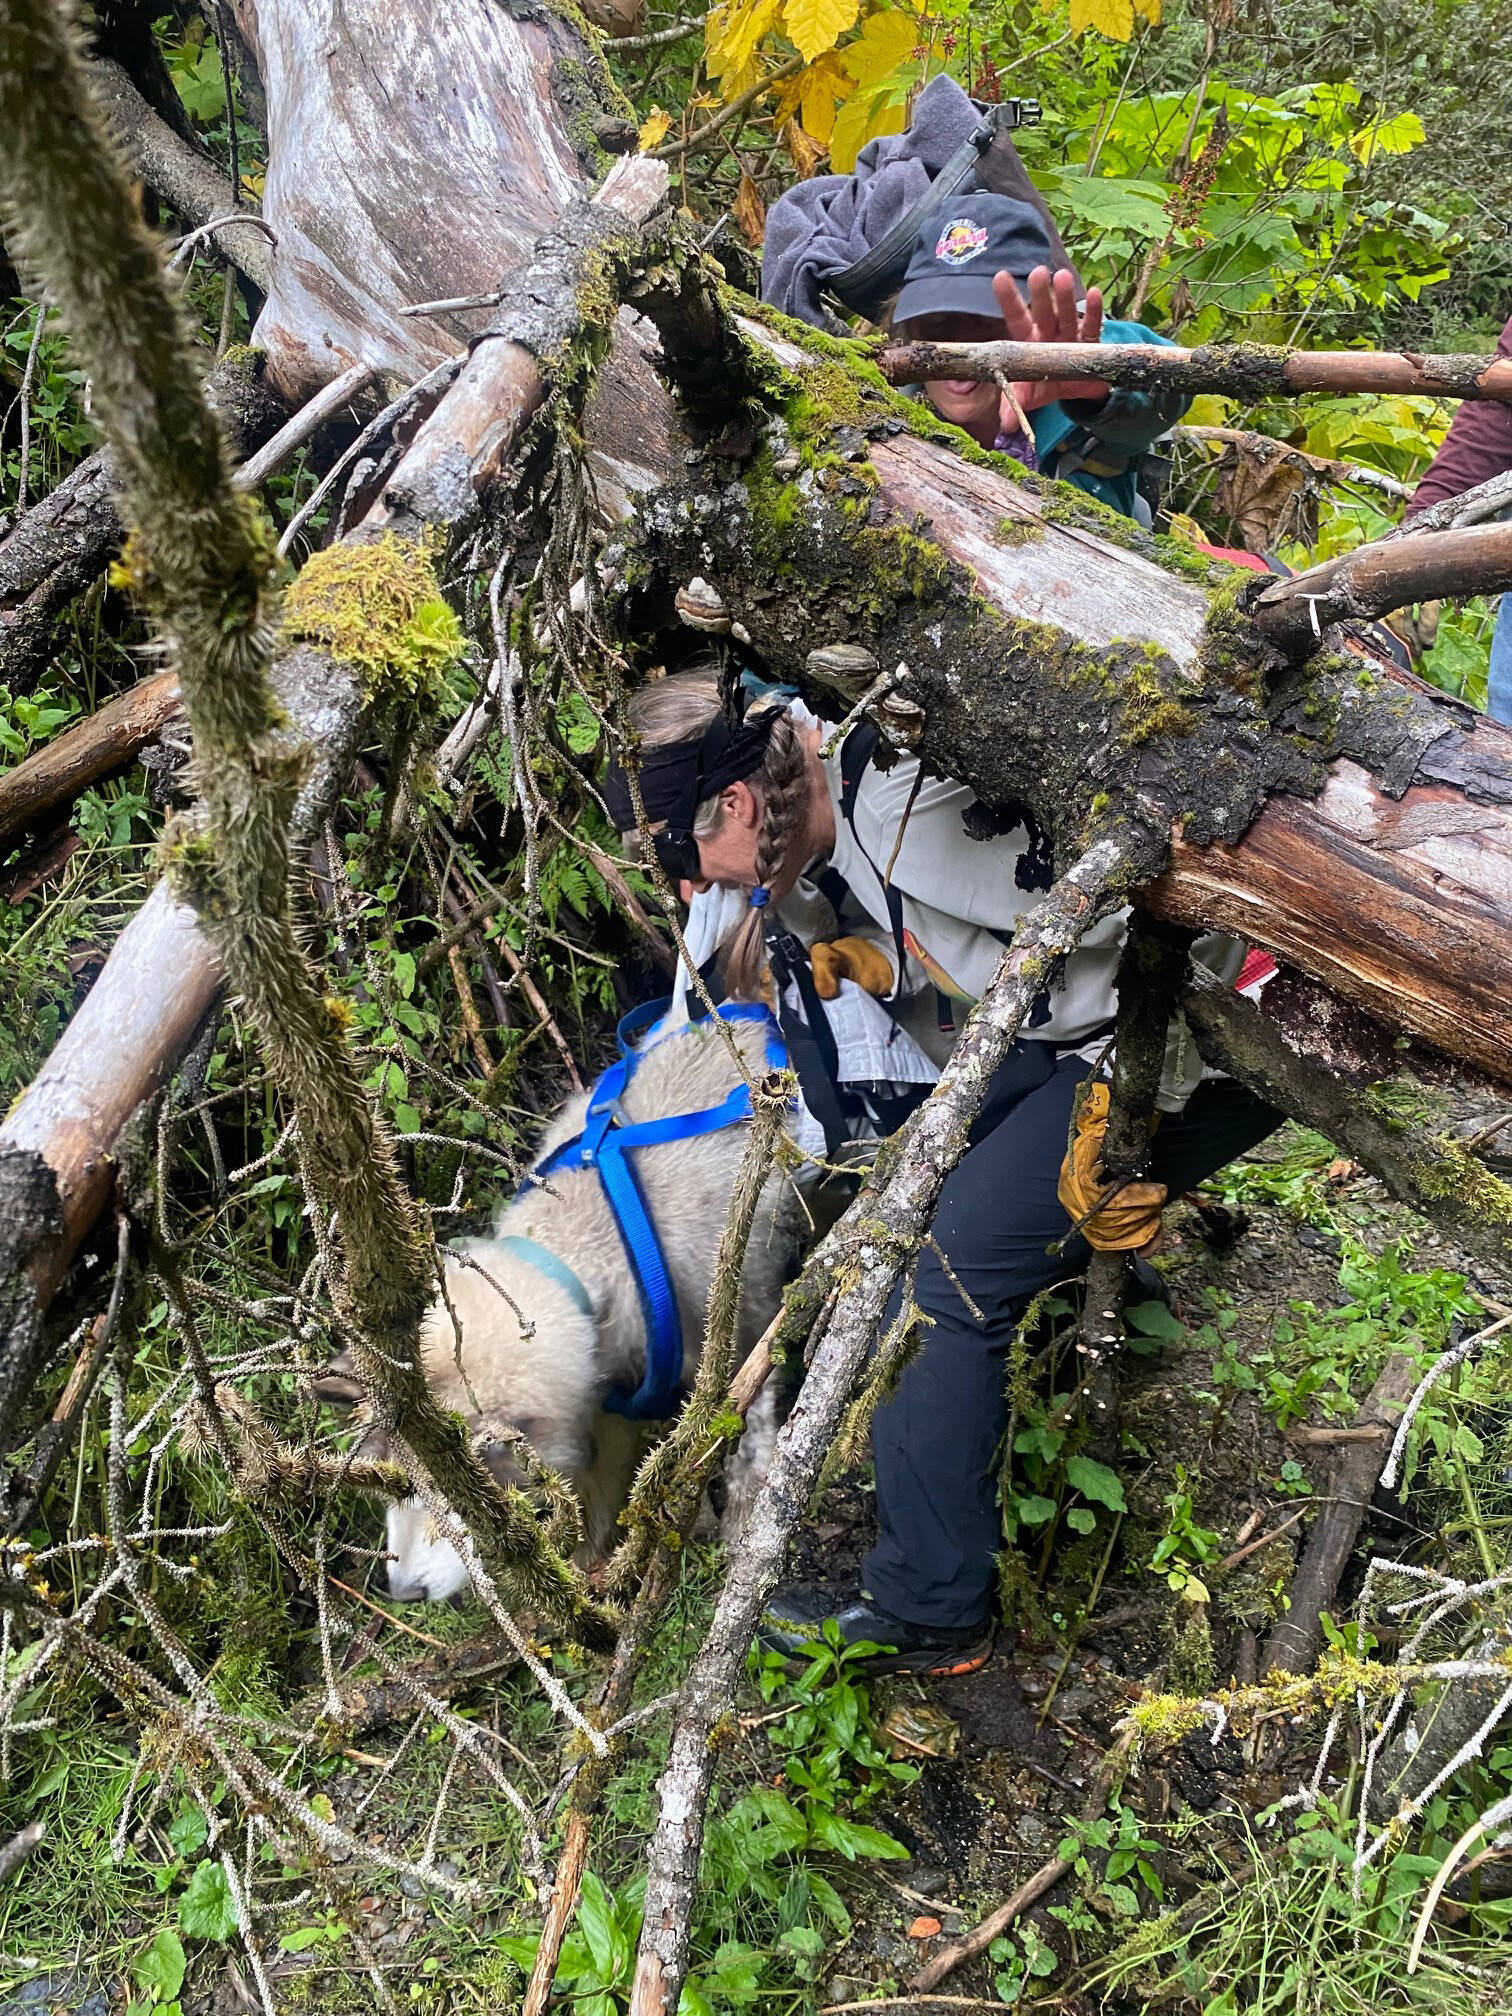 Kathy Sarns leads Thunder under a fallen tree while bringing him home after he went missing seven days earlier. ((Photos by Donna Faulkner, Elise Nacht Boyer and Janet Fink)